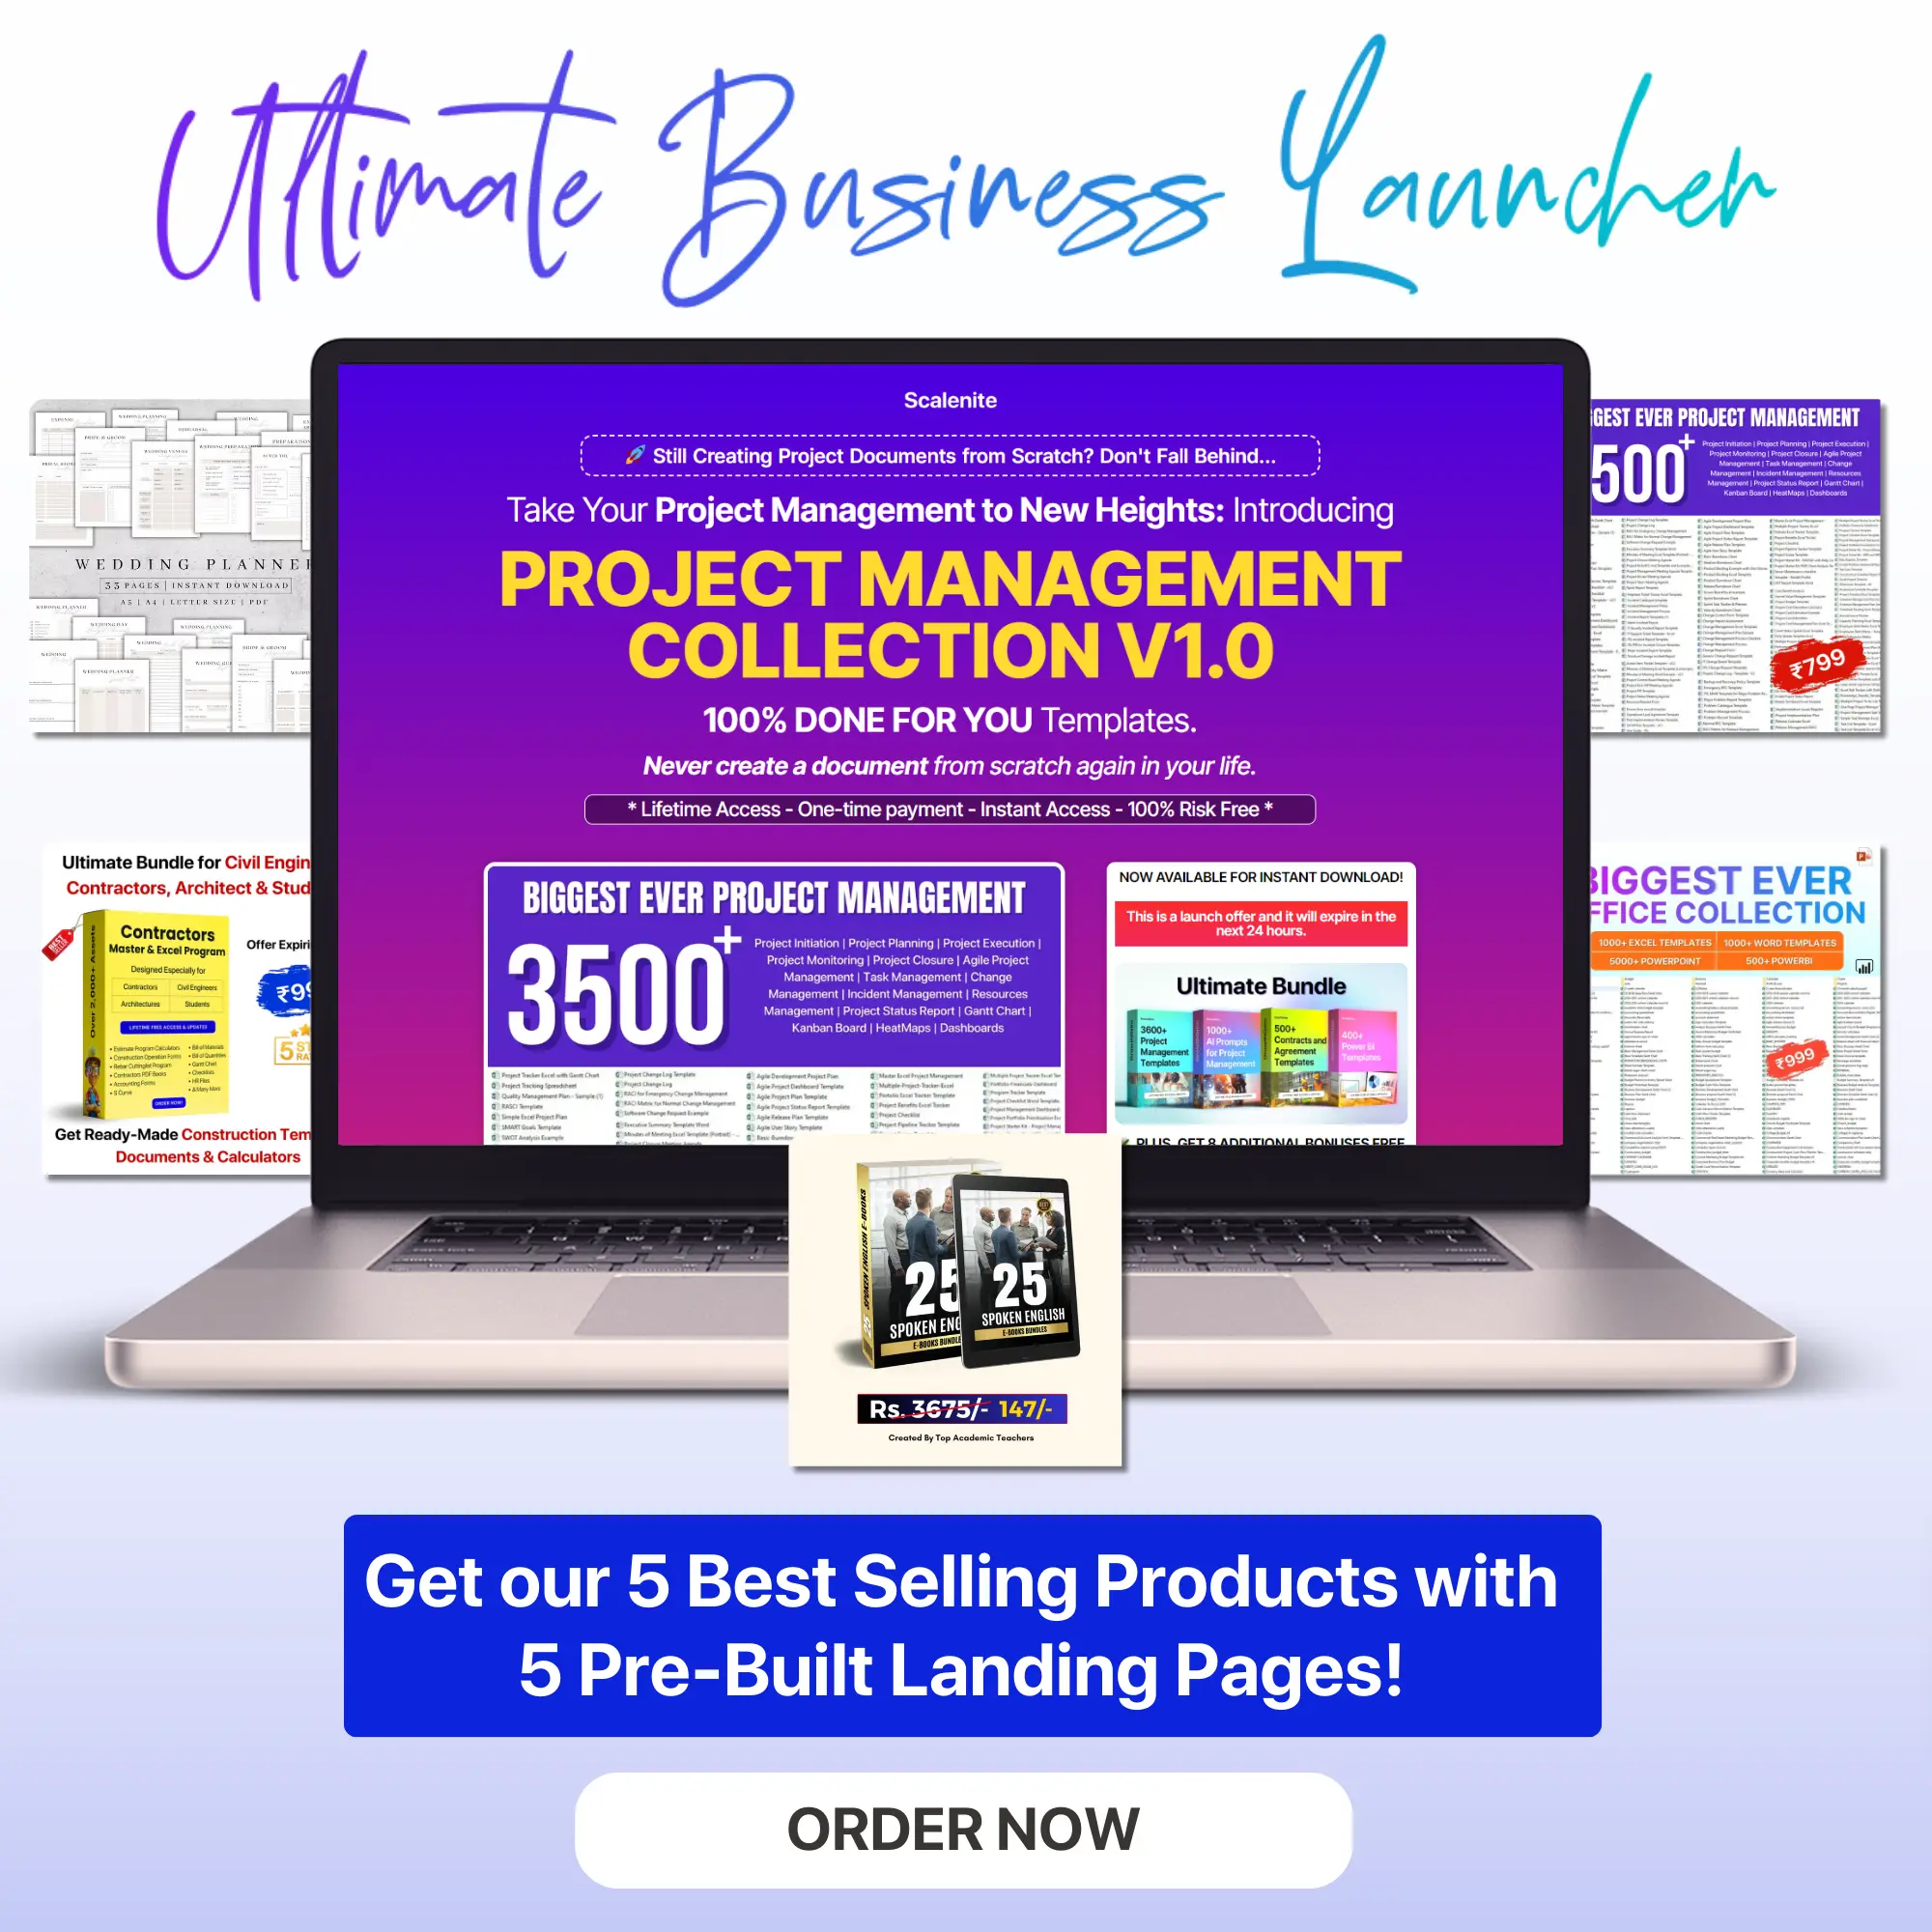 Ultimate Business Launcher - 5 Products & 5 Landing Pages